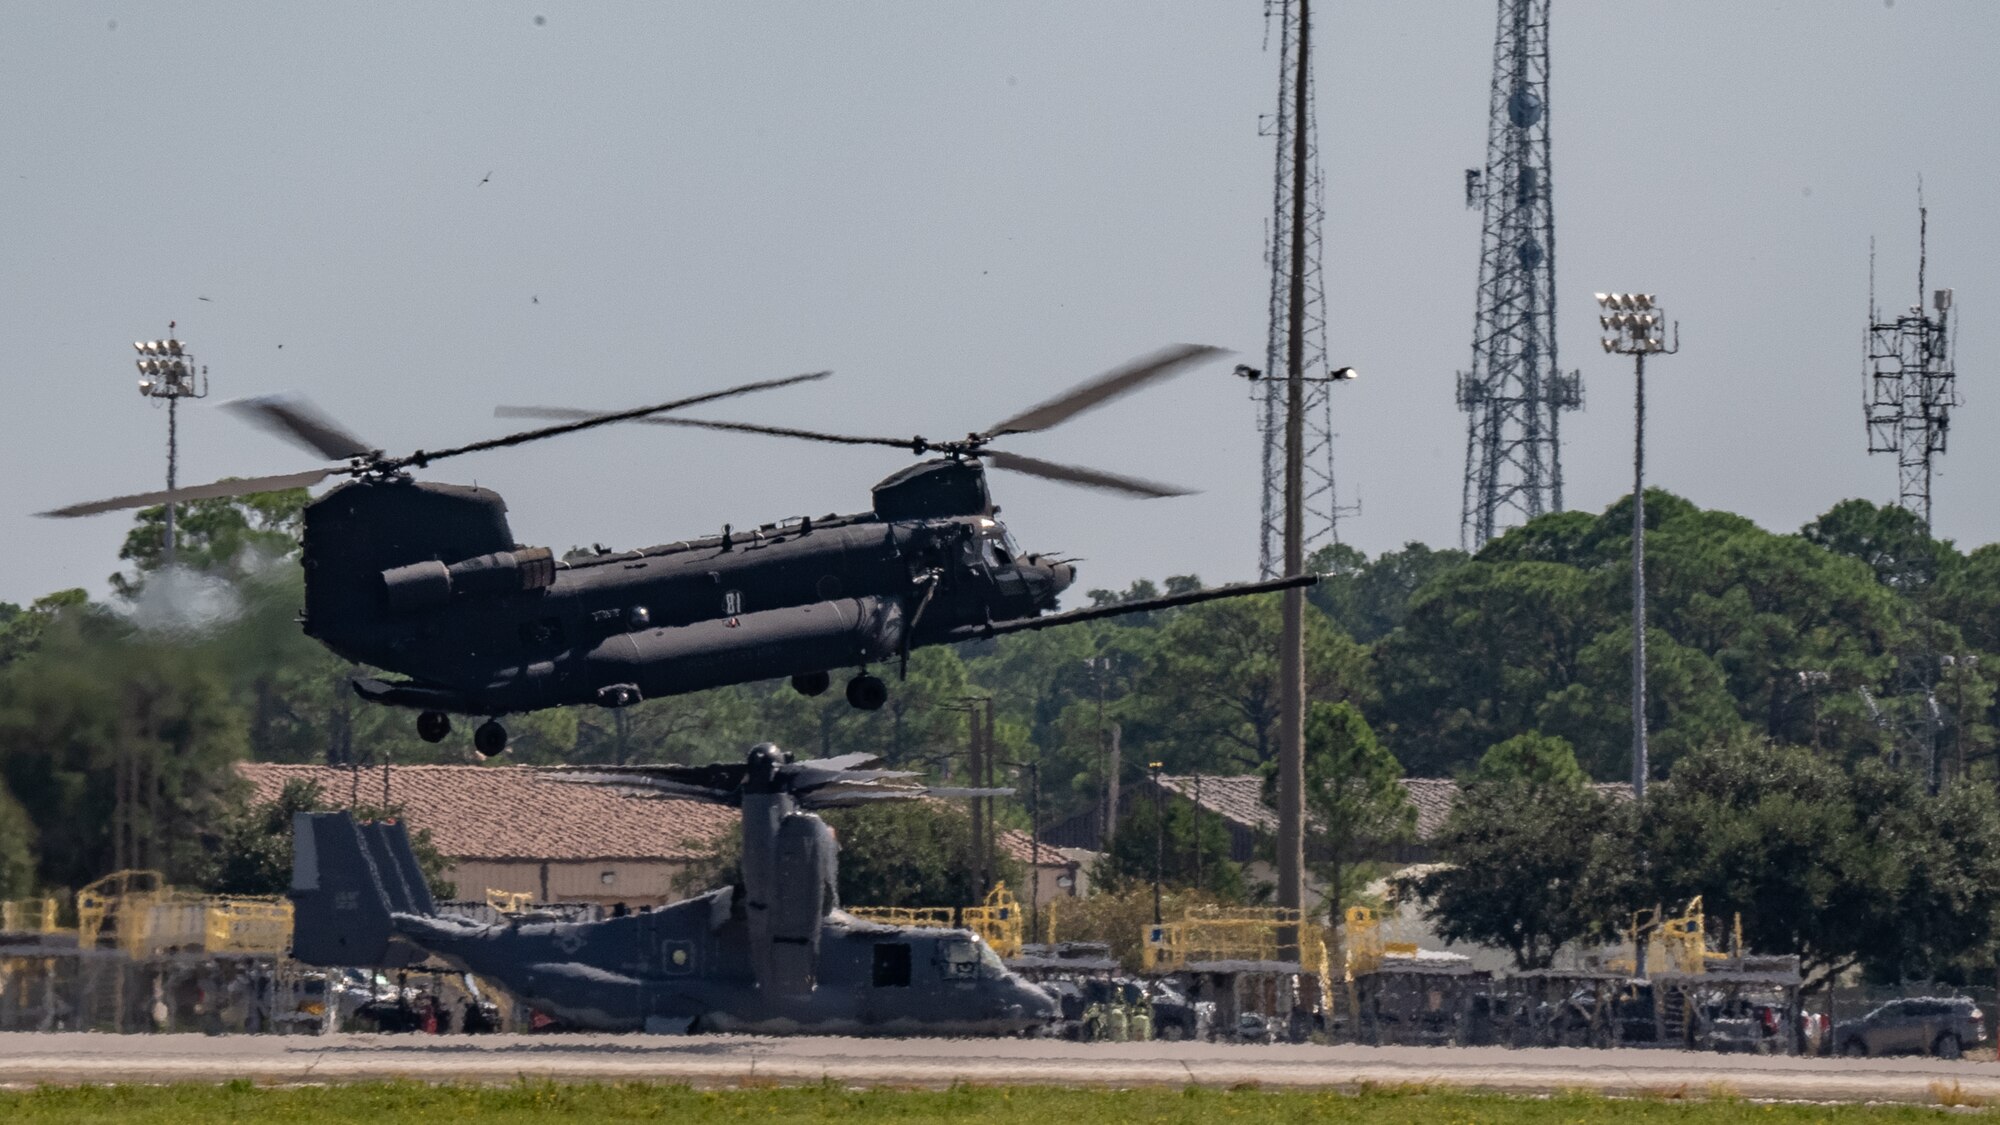 An MH-47G Chinook helicopter assigned to the 160th Special Operations Aviation Regiment prepares to land the flight line during the 94th Joint Civilian Orientation Conference at Hurlburt Field, Florida, Sept. 21, 2023. JCOC is the Department of Defense’s public liaison program, designed to provide American business and community leaders with a deeper understanding of the military by showcasing the rewards and challenges service members face both on and off the battlefield. (U.S. Air Force photo by Airman 1st Class Hussein Enaya)